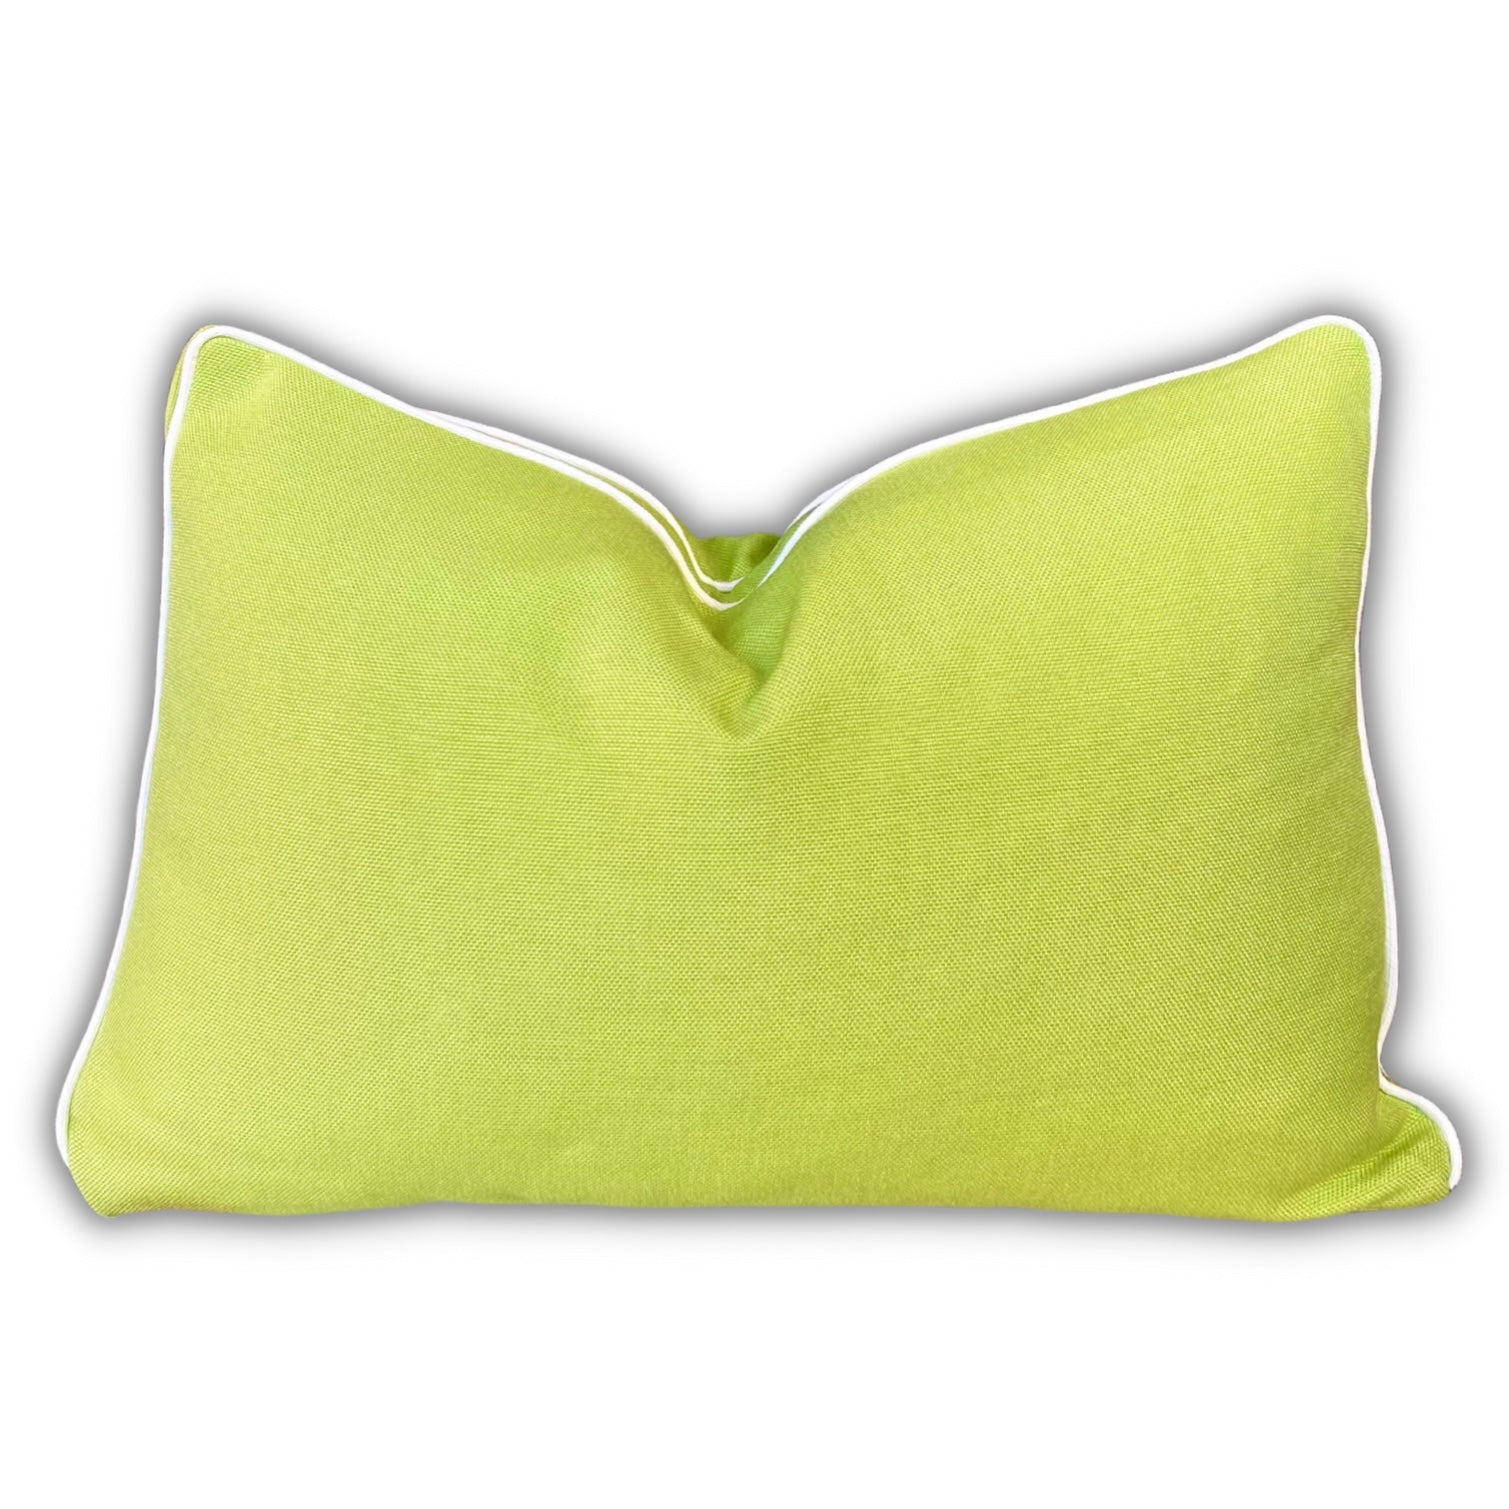 Lime Green Upholstery Fabric